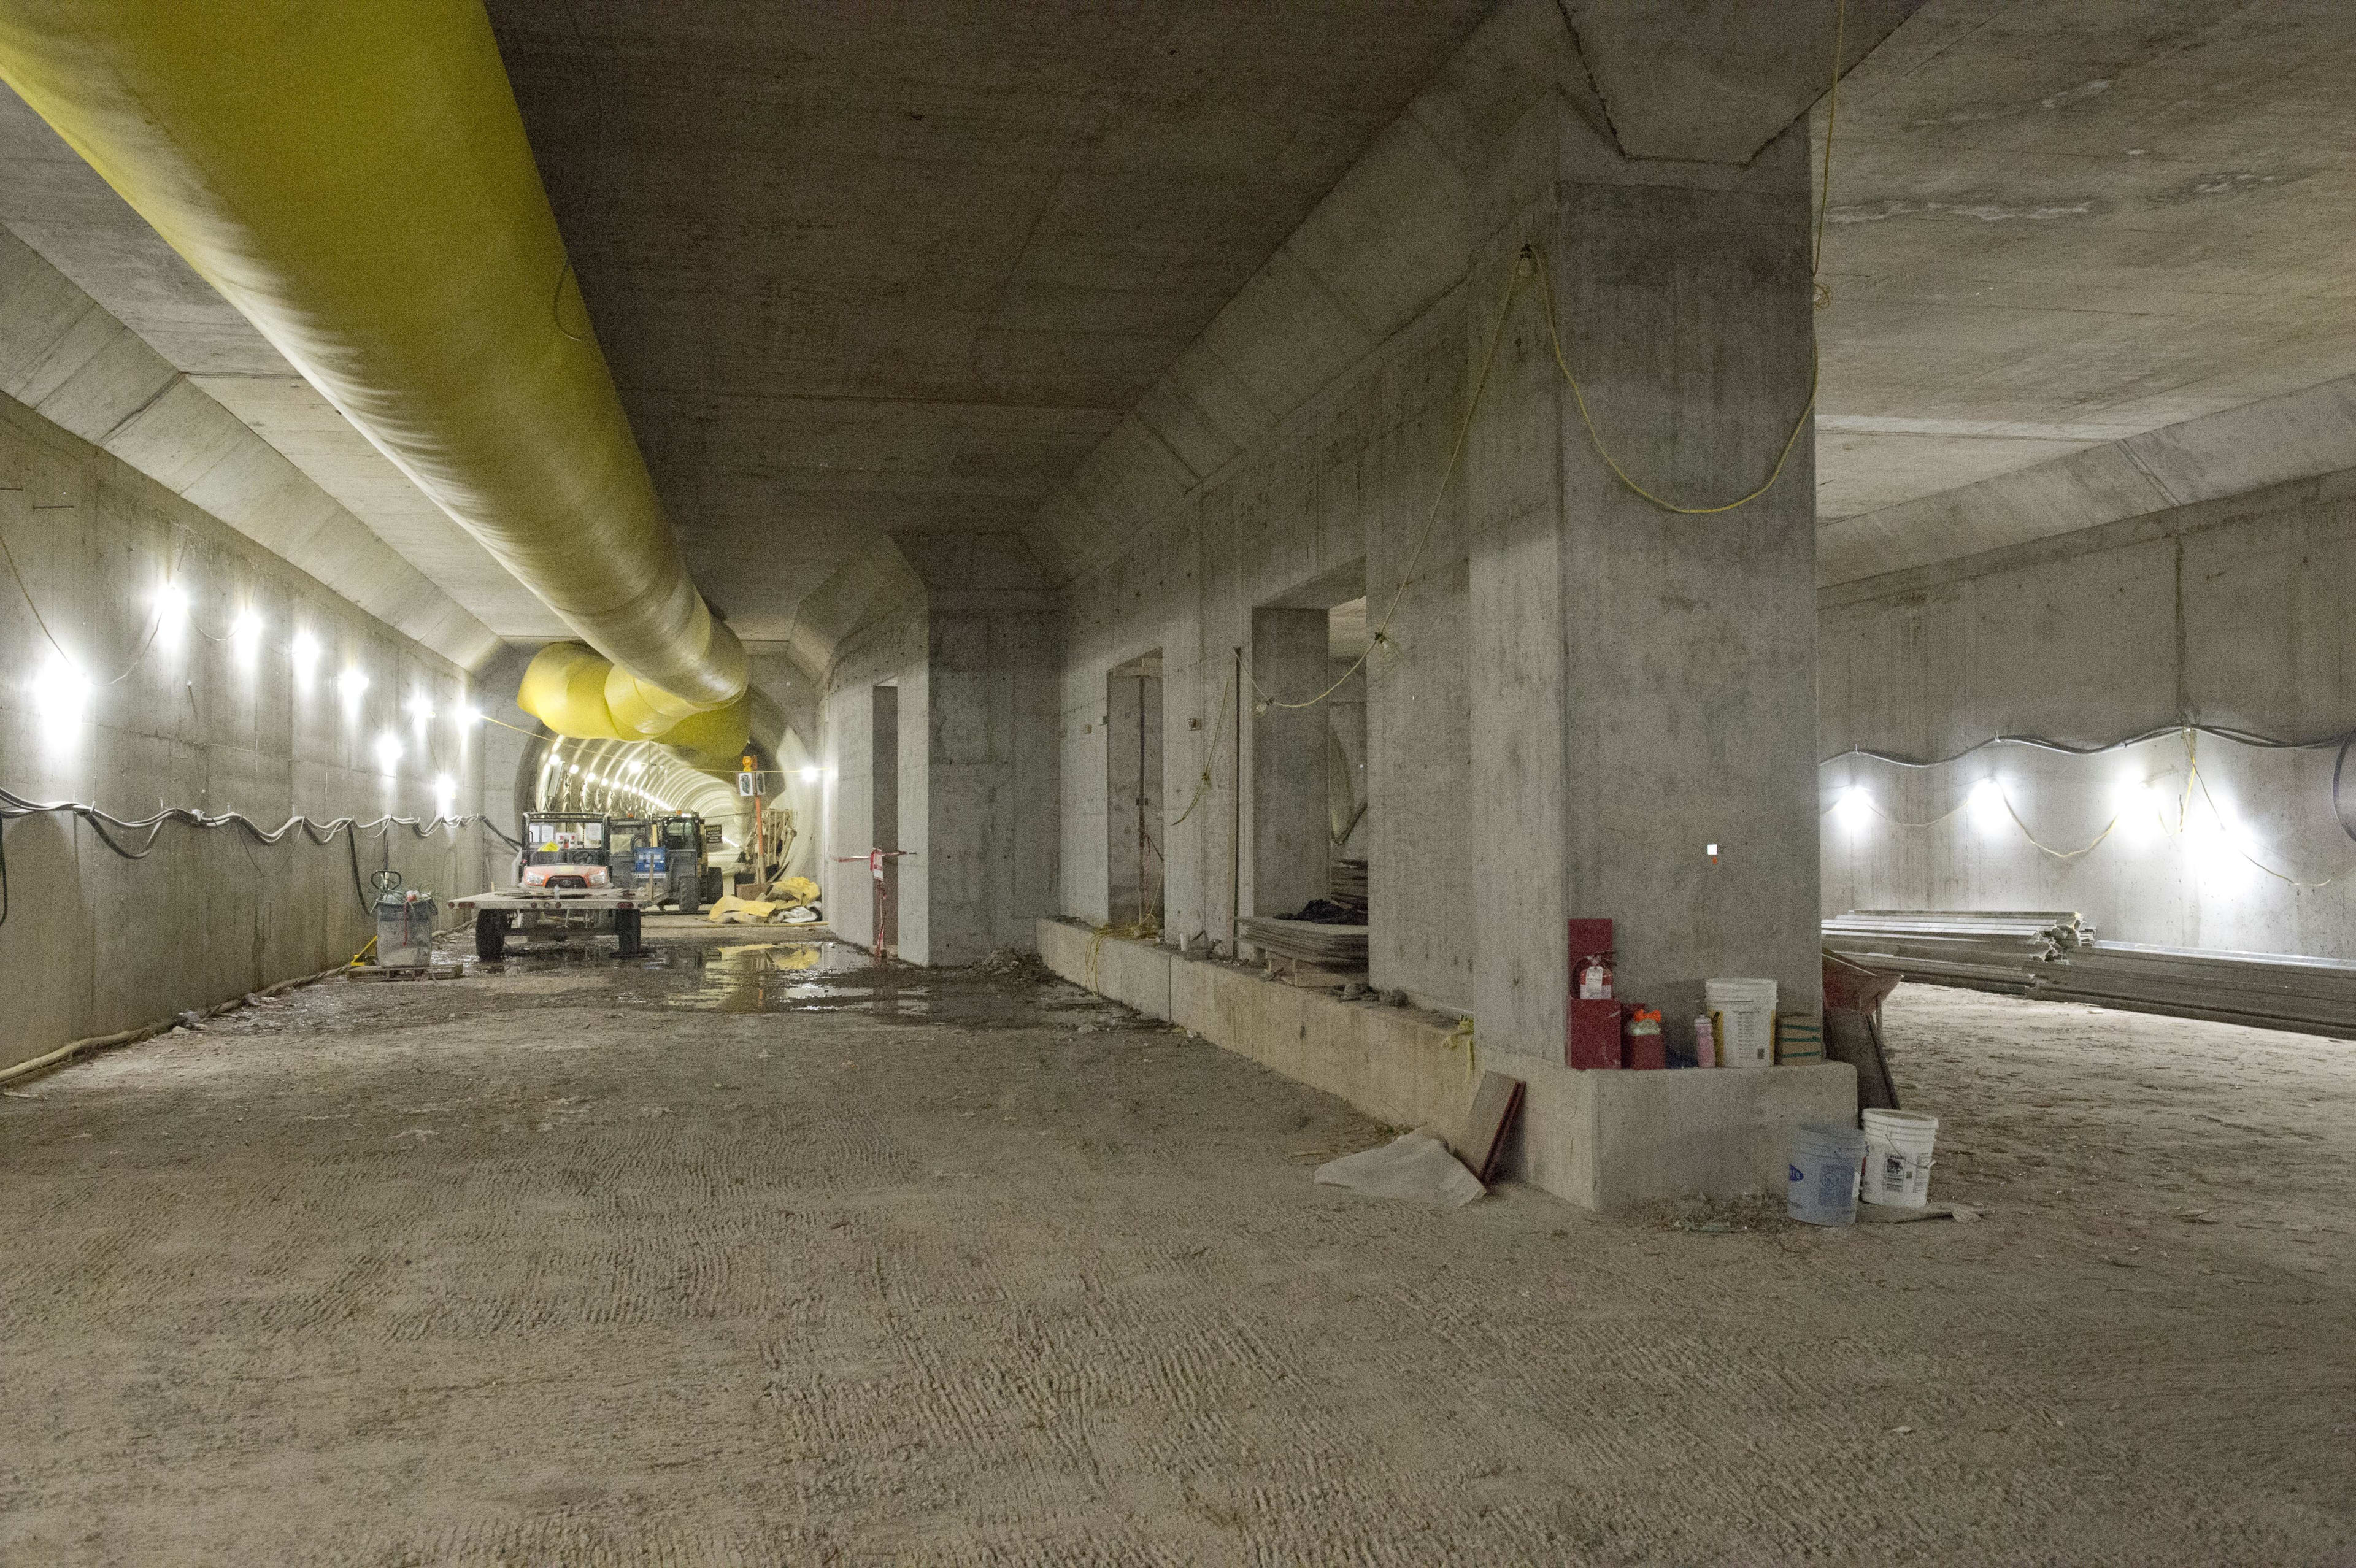 Inside the large cavern, concrete walls and equipment - along with yellow ventillation tubing - c...